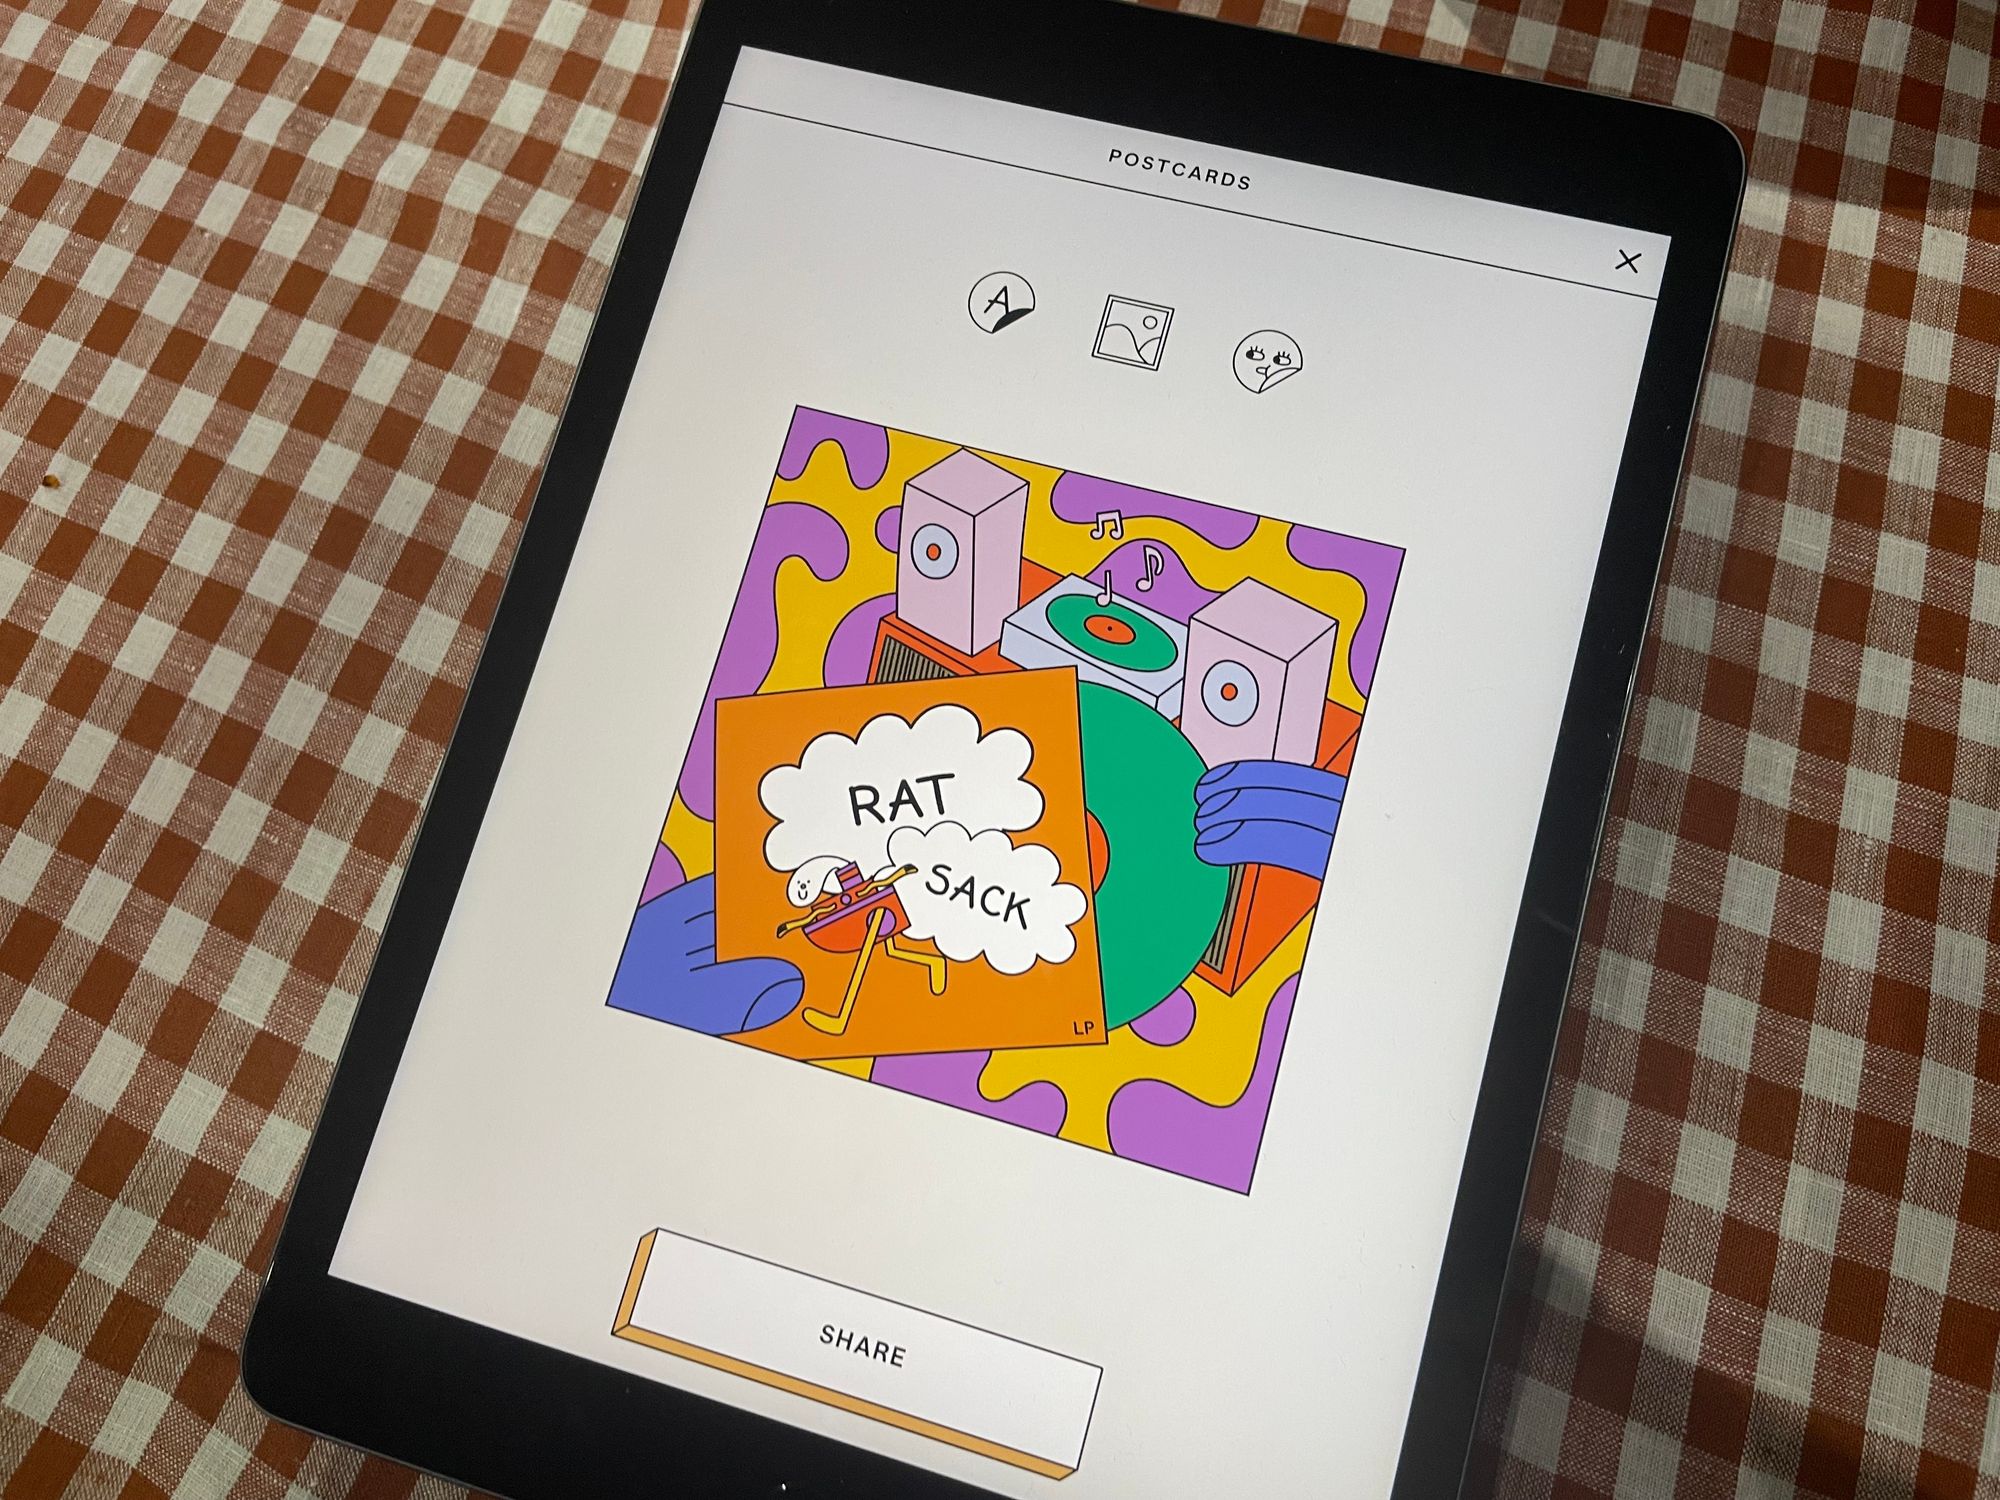 A tablet with a colourful postcard from the game that says "Rat Sack" among cartoons.